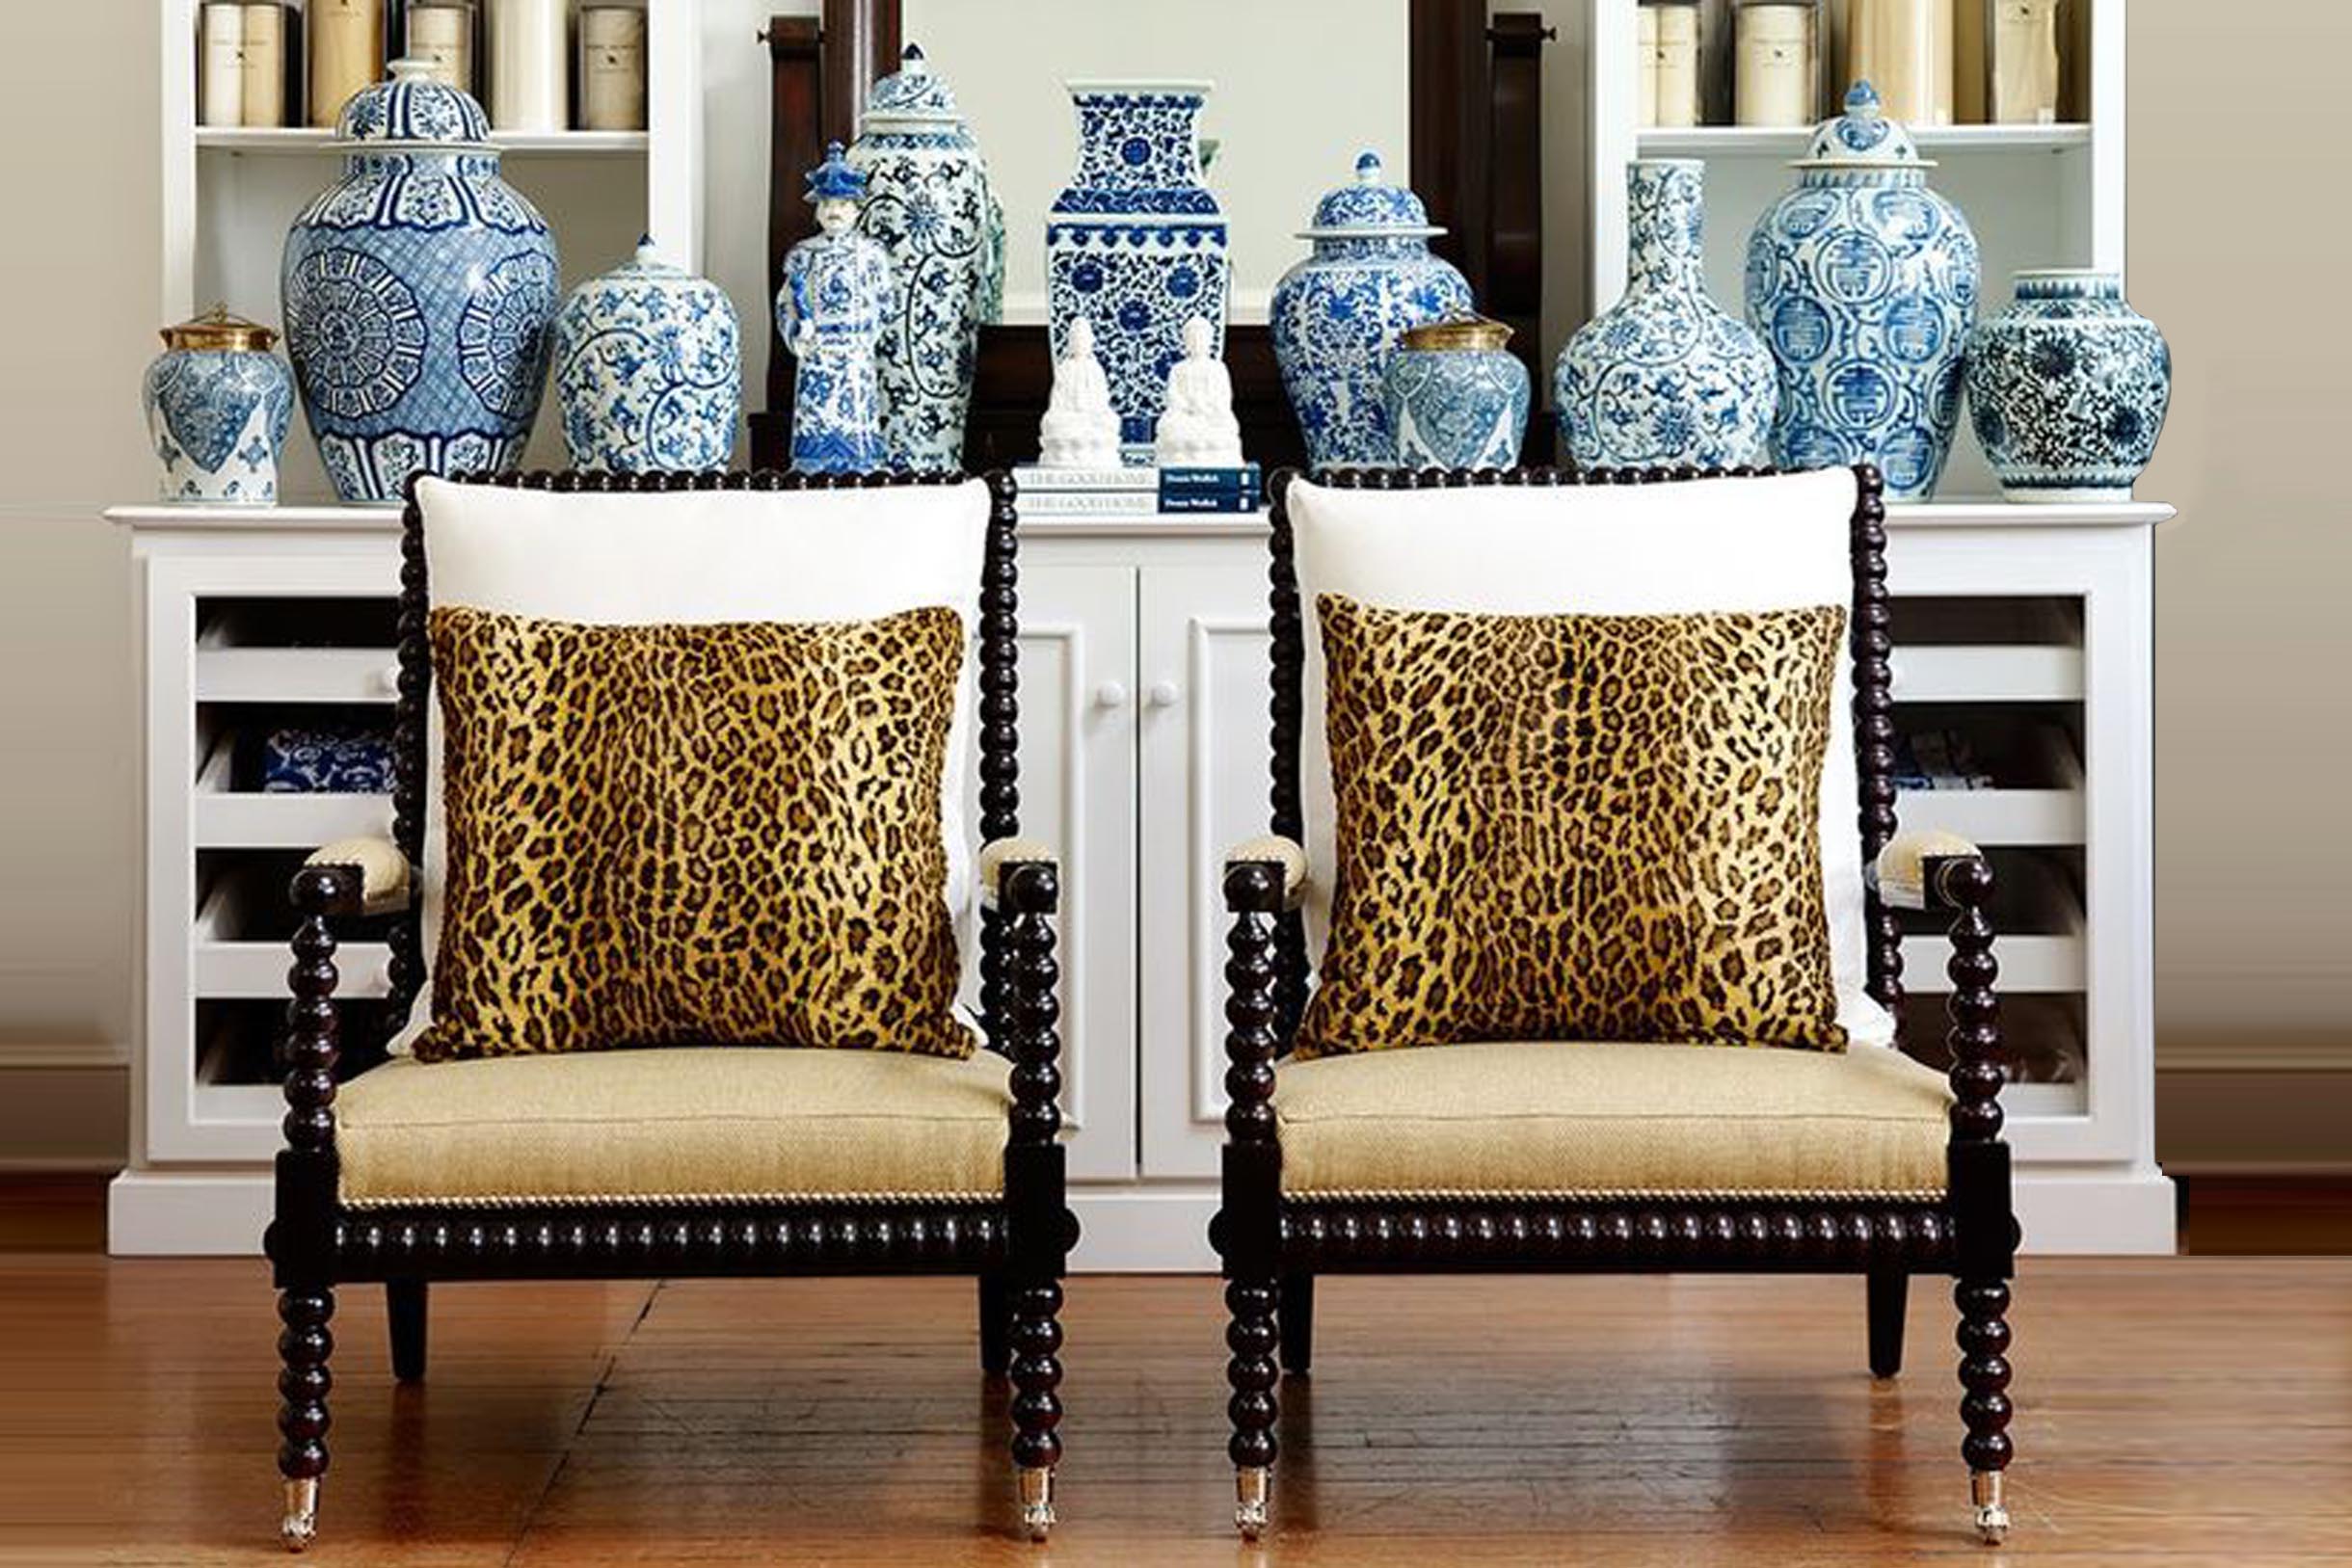 A Touch of Drama - 5 Ways to use Accent Furniture l Antique Spool Chair l The Past Perfect Collection l Singapore